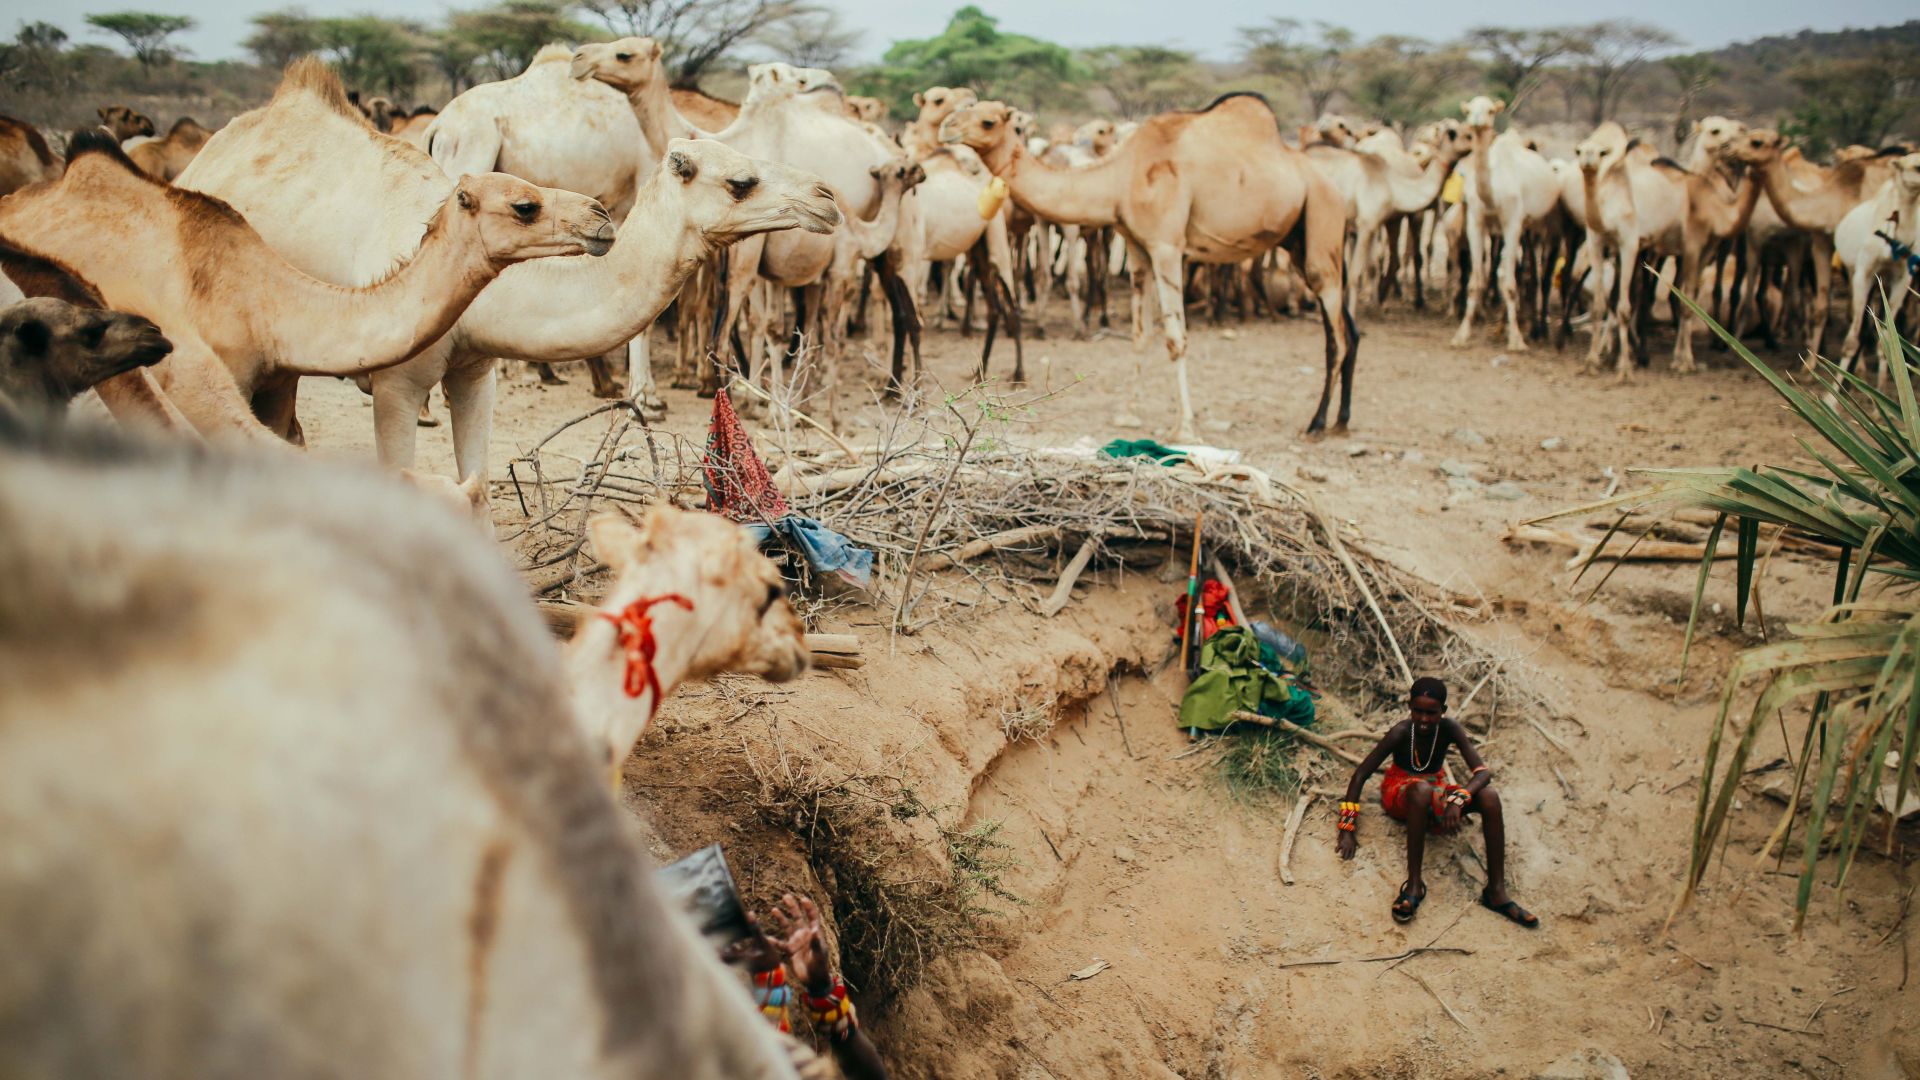 Camels rest and drink at a watering hole in Kenya